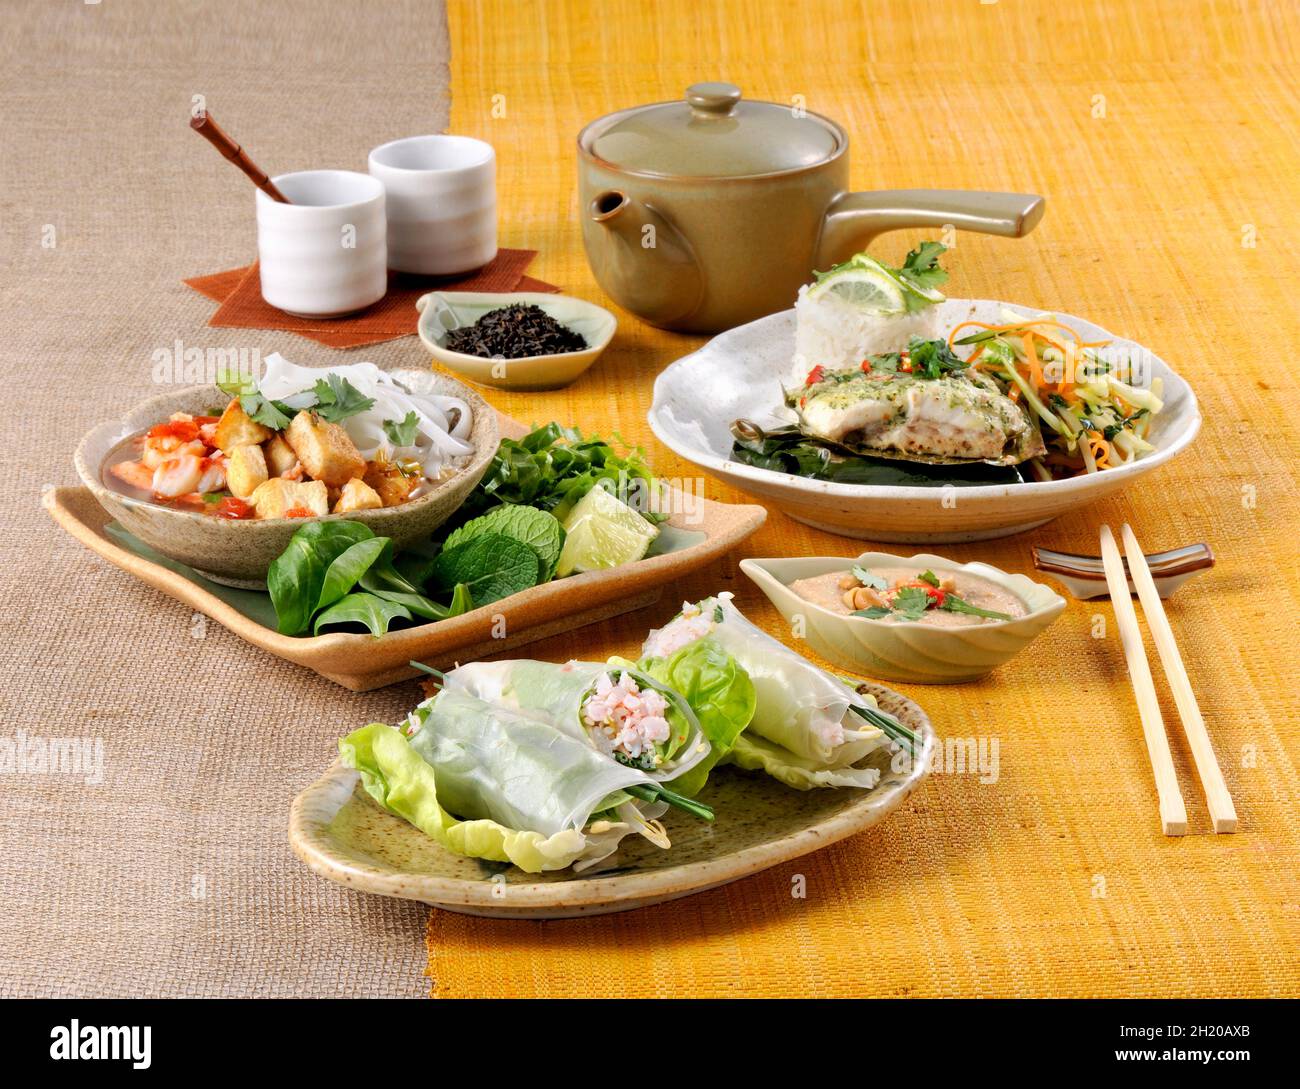 Various Thai dishes on a yellow table runner Stock Photo